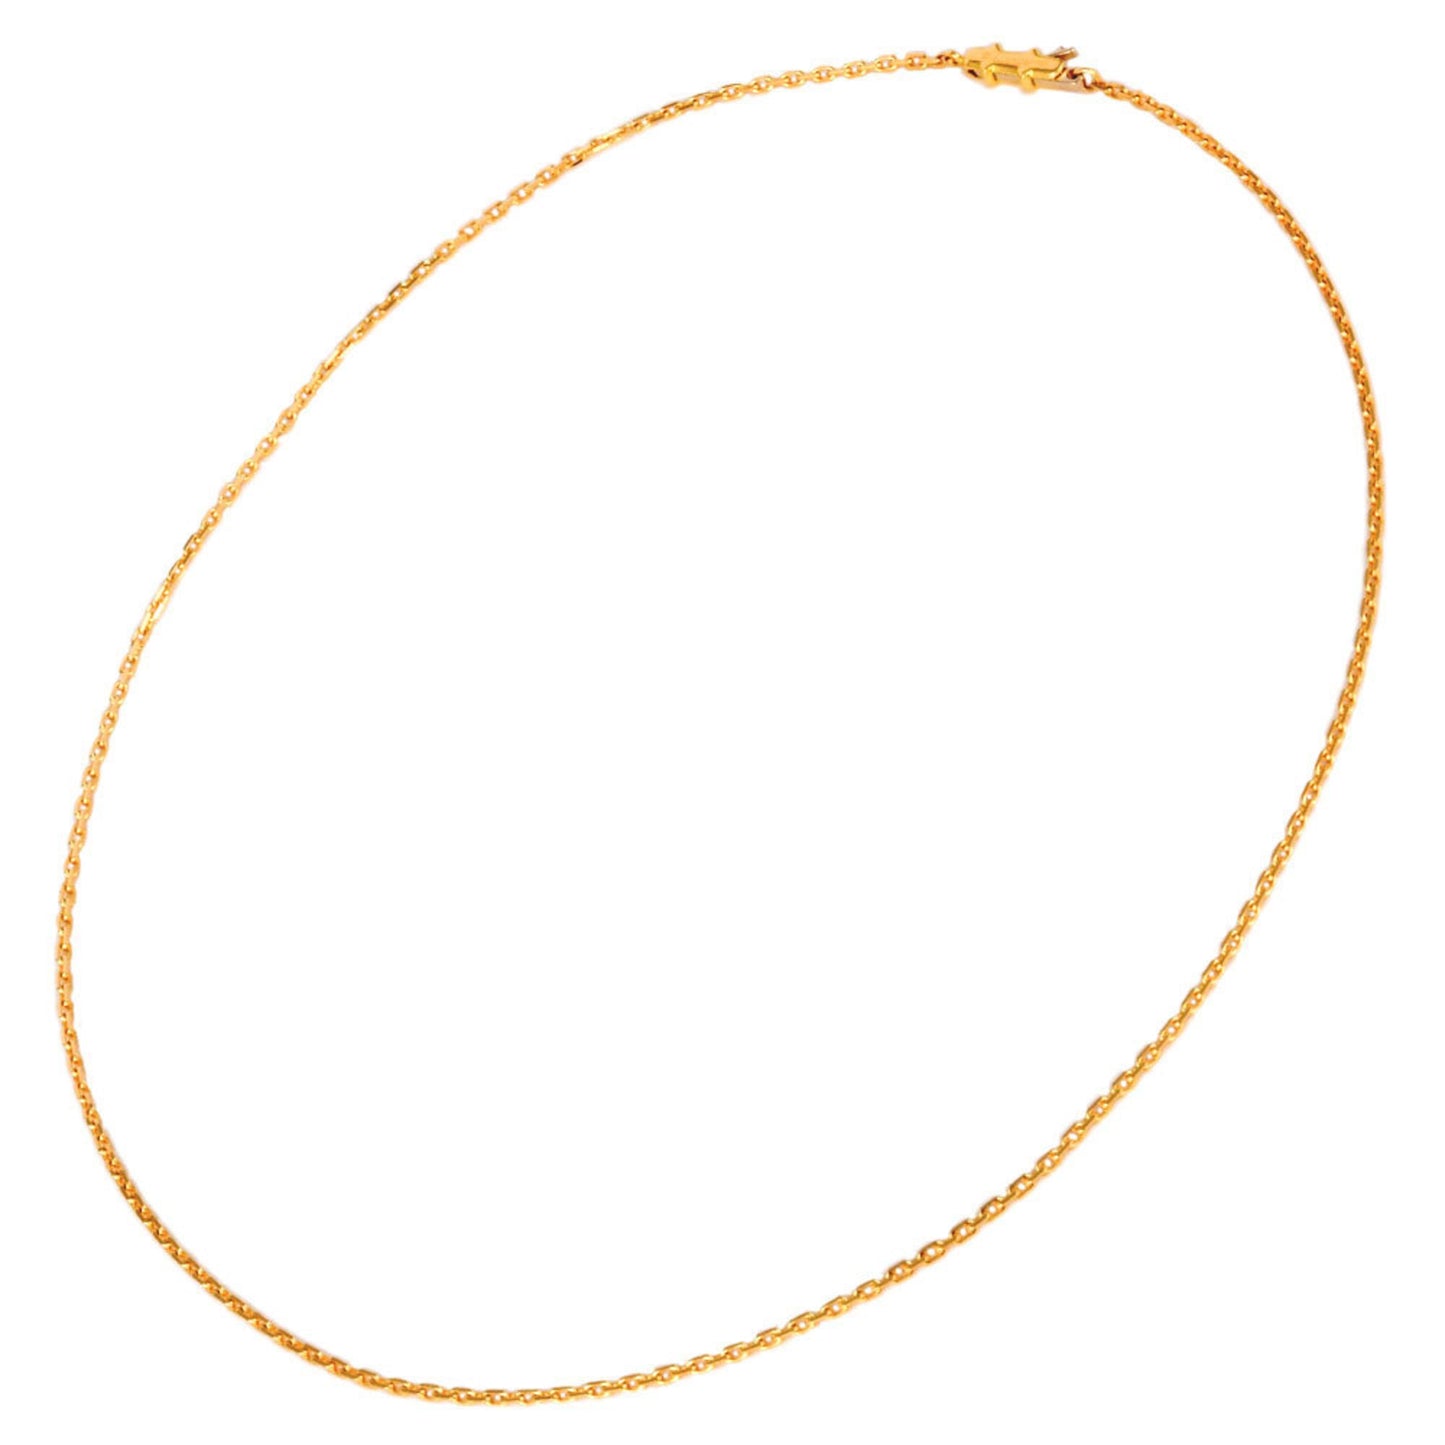 Cartier Women's 18K Yellow Gold Chain Necklace in Gold